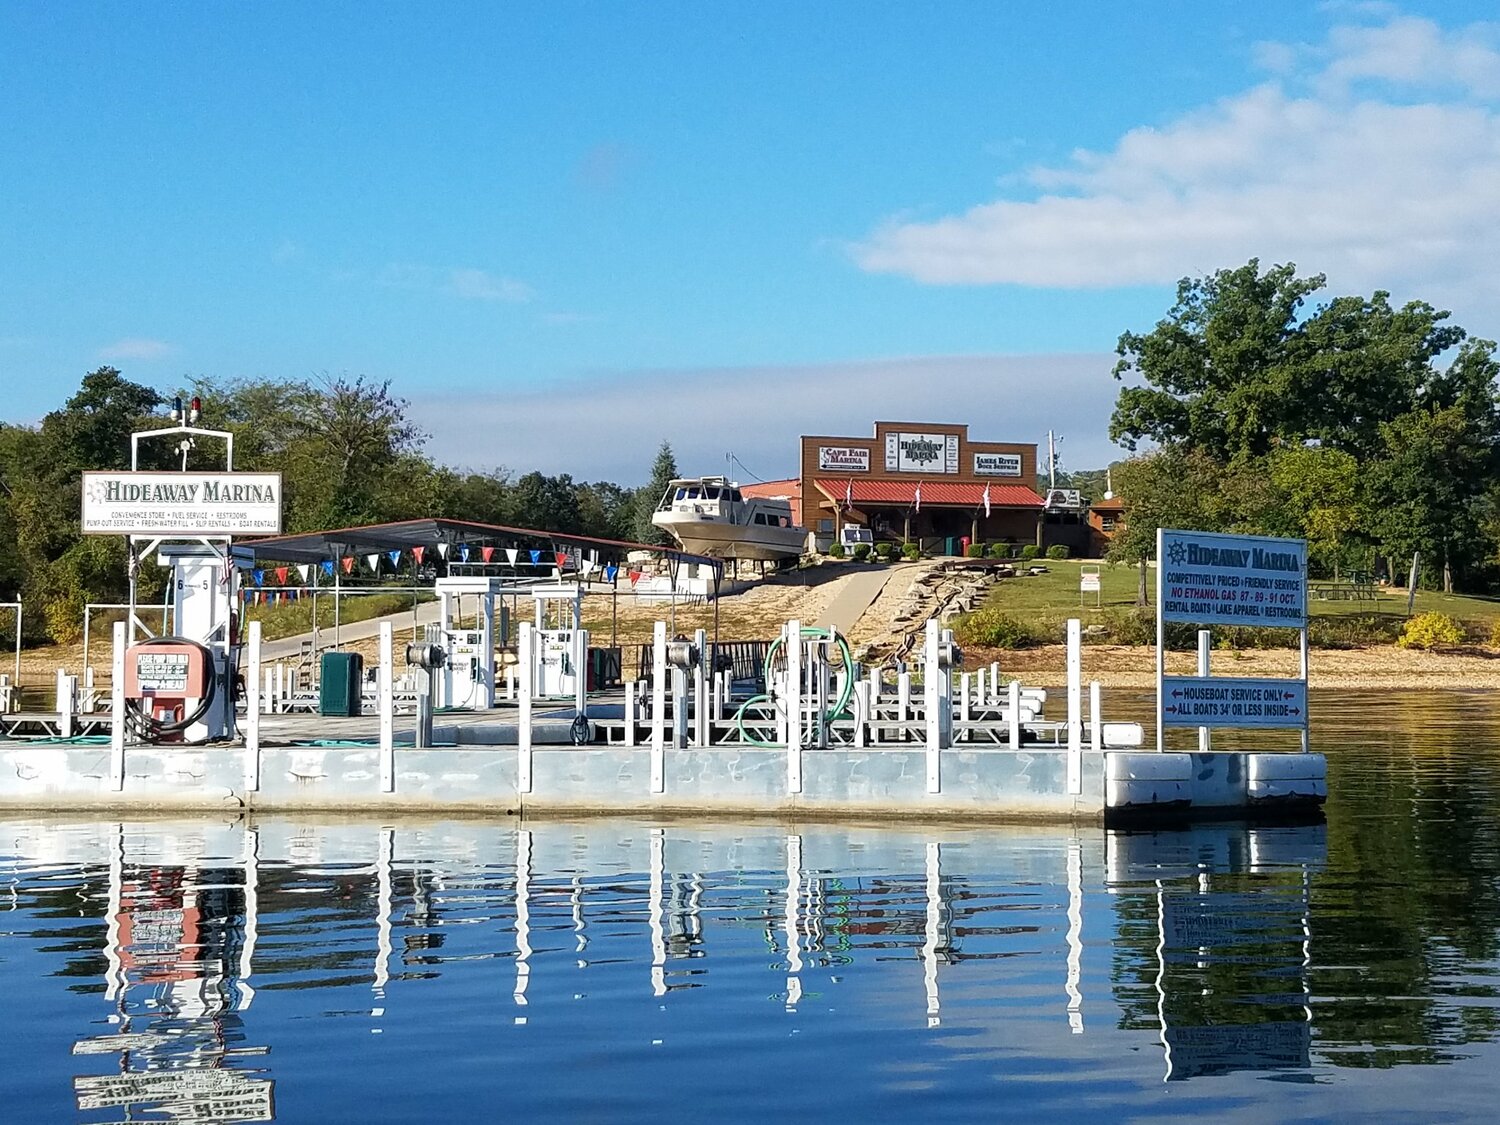 Hideaway Marina, along with its sister property, was bought 15 years ago by Scott Raridon Sr.